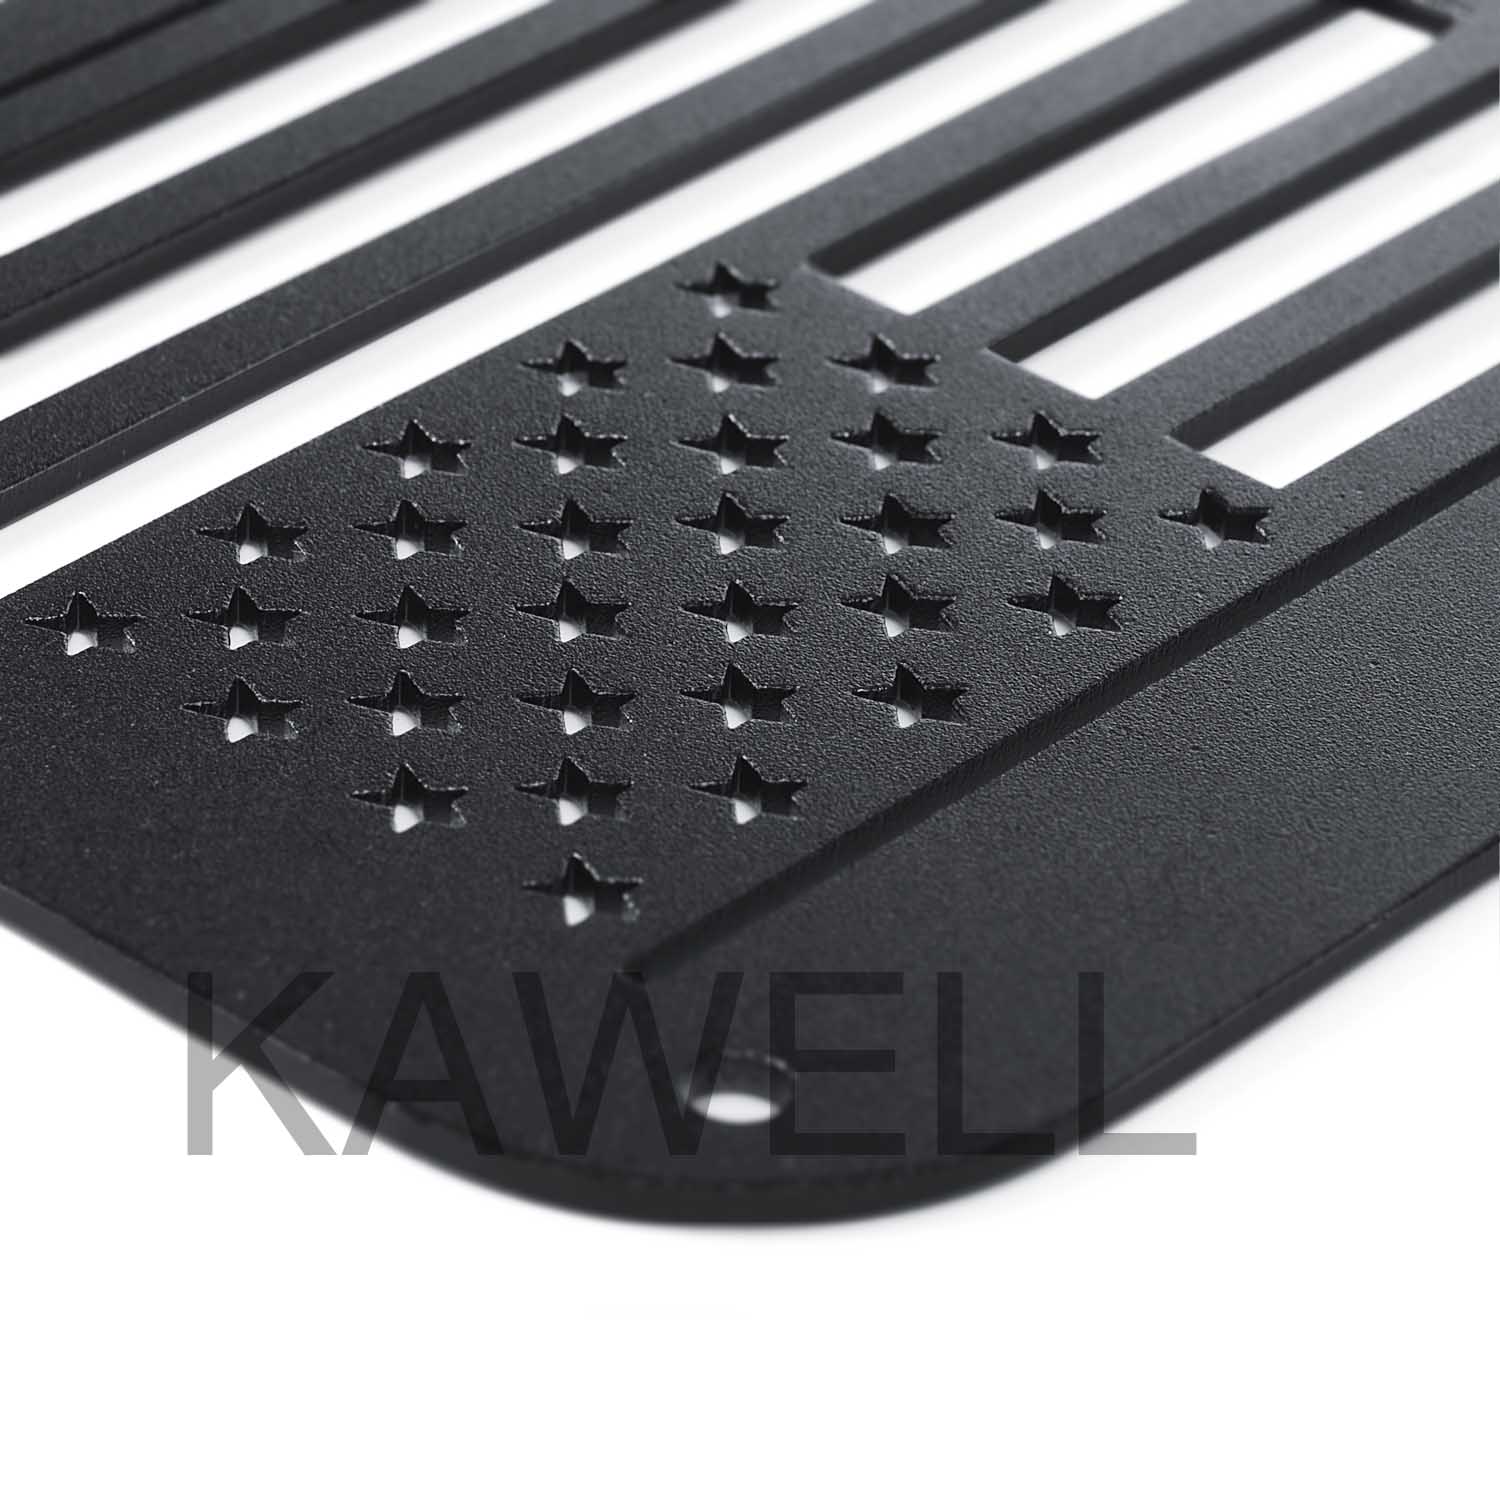 KAWELL 2 Pcs Rear Tail lamp Tail light Cover Trim Guards Protector for Jeep Wrangler Sport X Sahara Unlimited Rubicon 2007-2016 (USA Flag) 